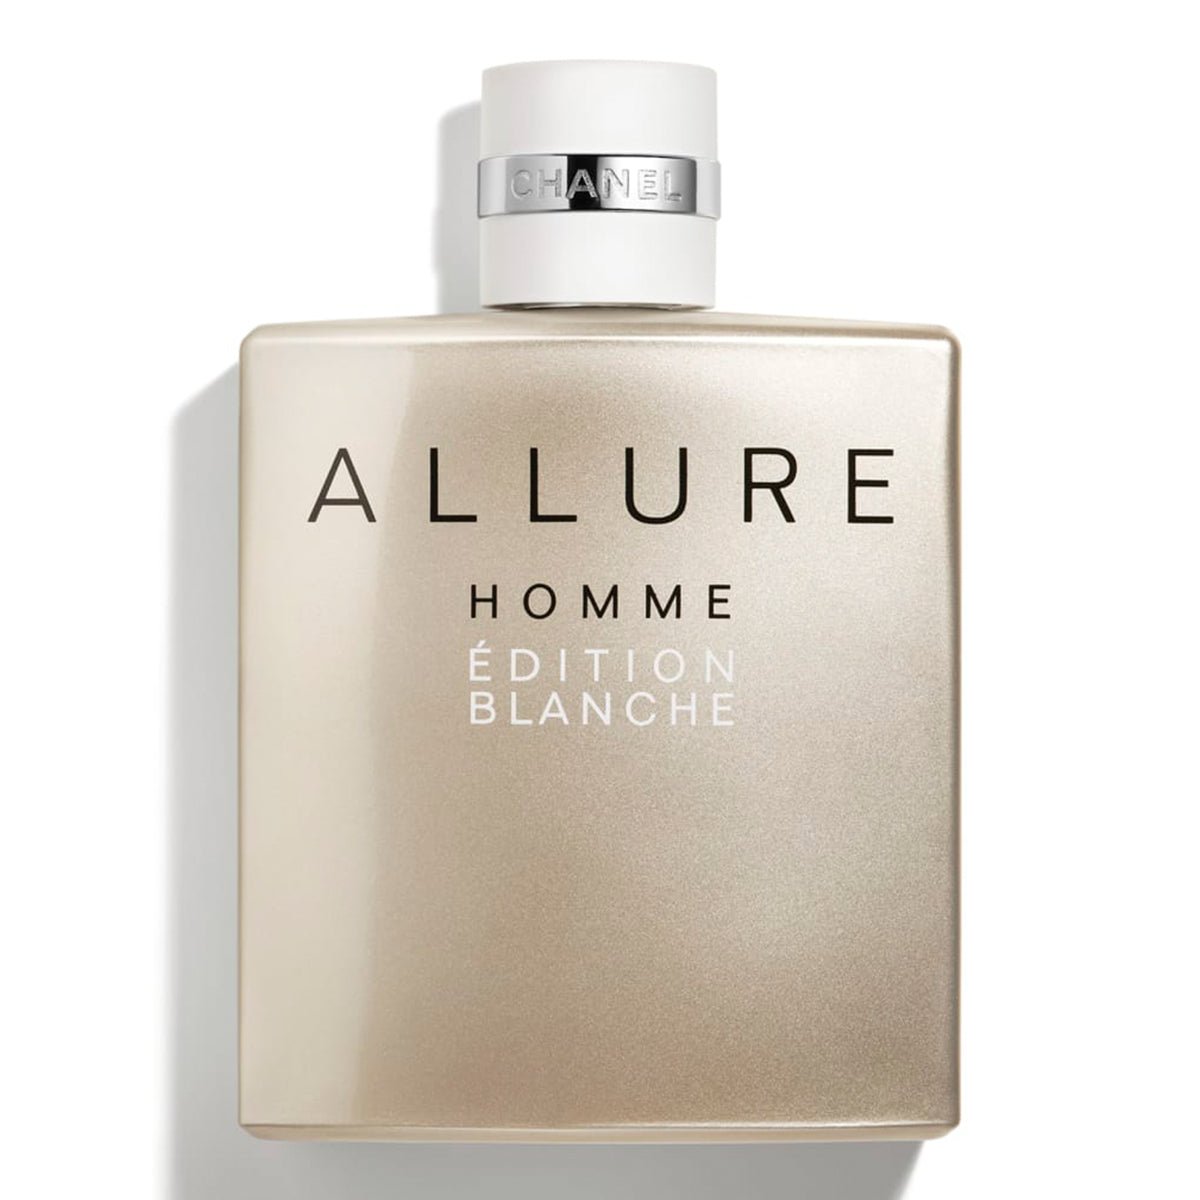 Chanel Allure Homme Edition Blanche Perfume Edp For Men 100Ml - AllurebeautypkChanel Allure Homme Edition Blanche Perfume Edp For Men 100Ml